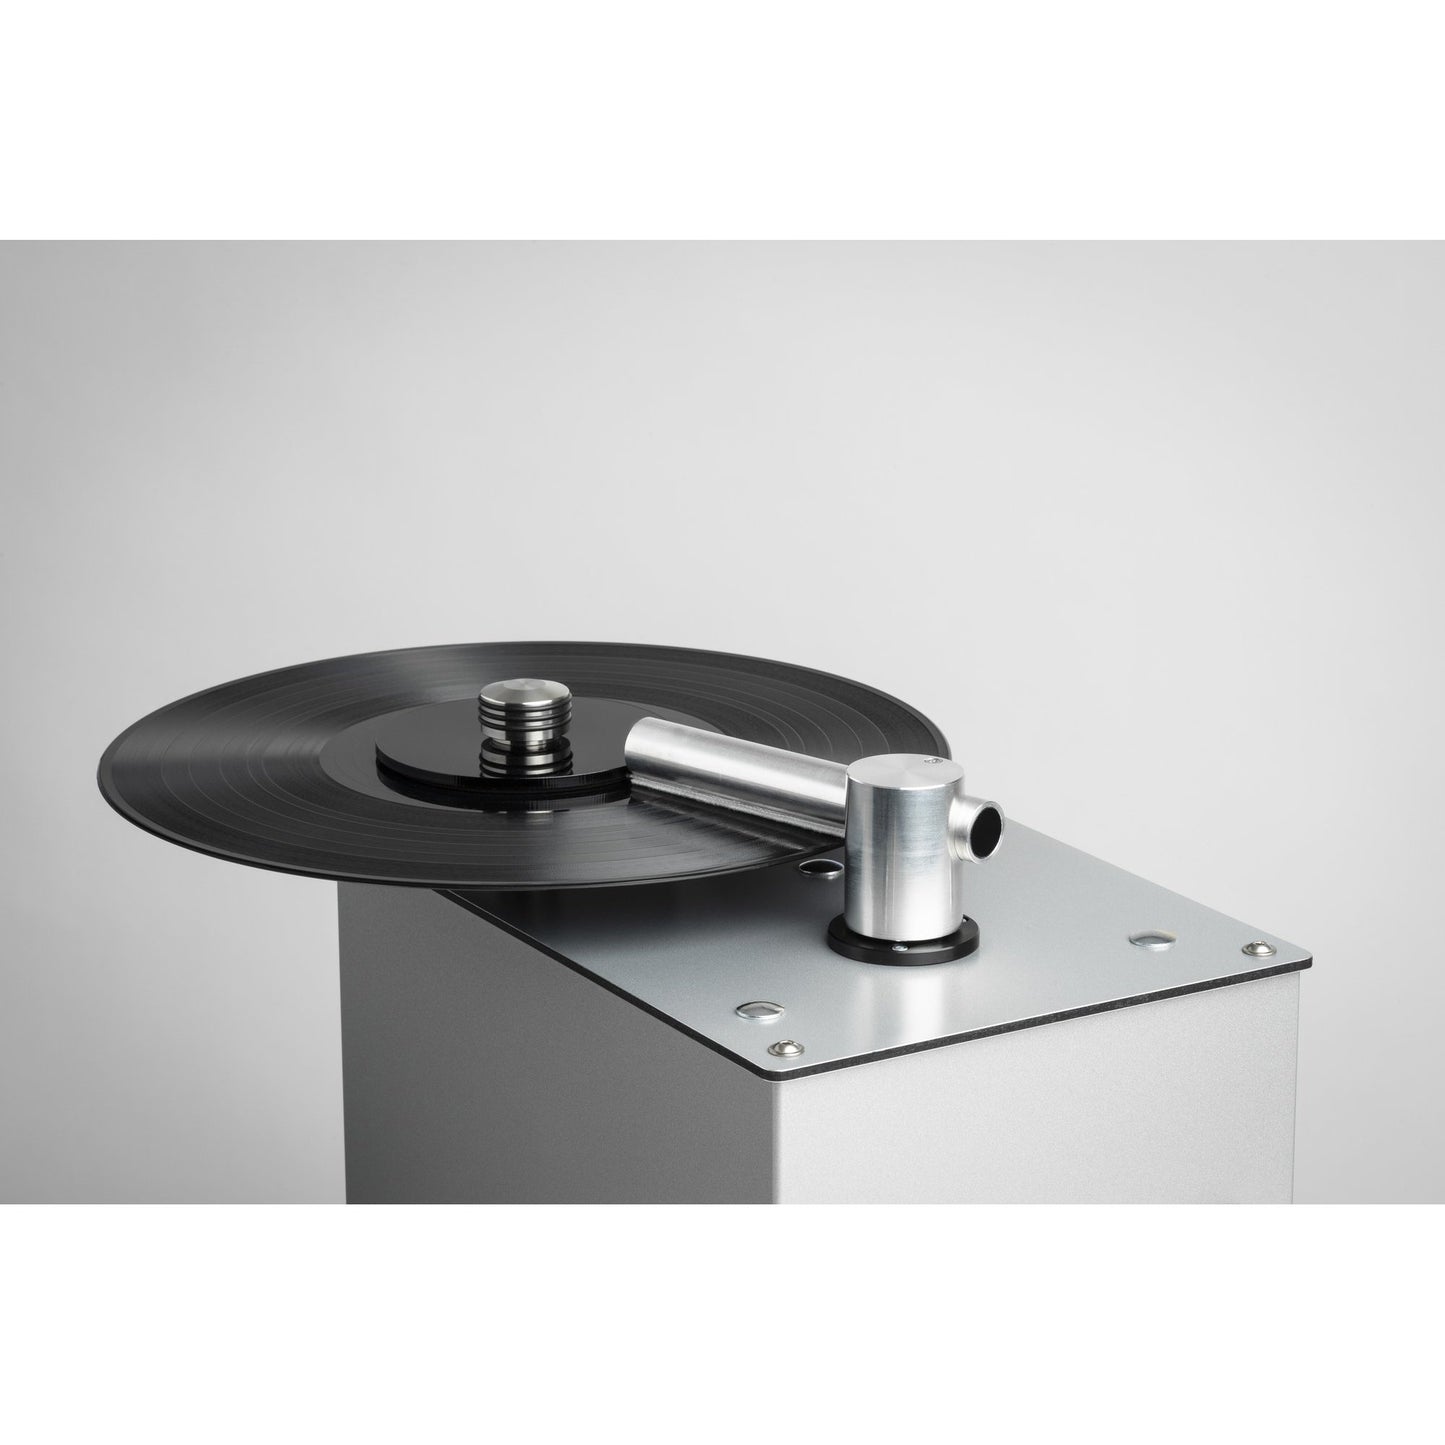 VC-E Compact Record Cleaning Machine-Pro-Ject-Mood